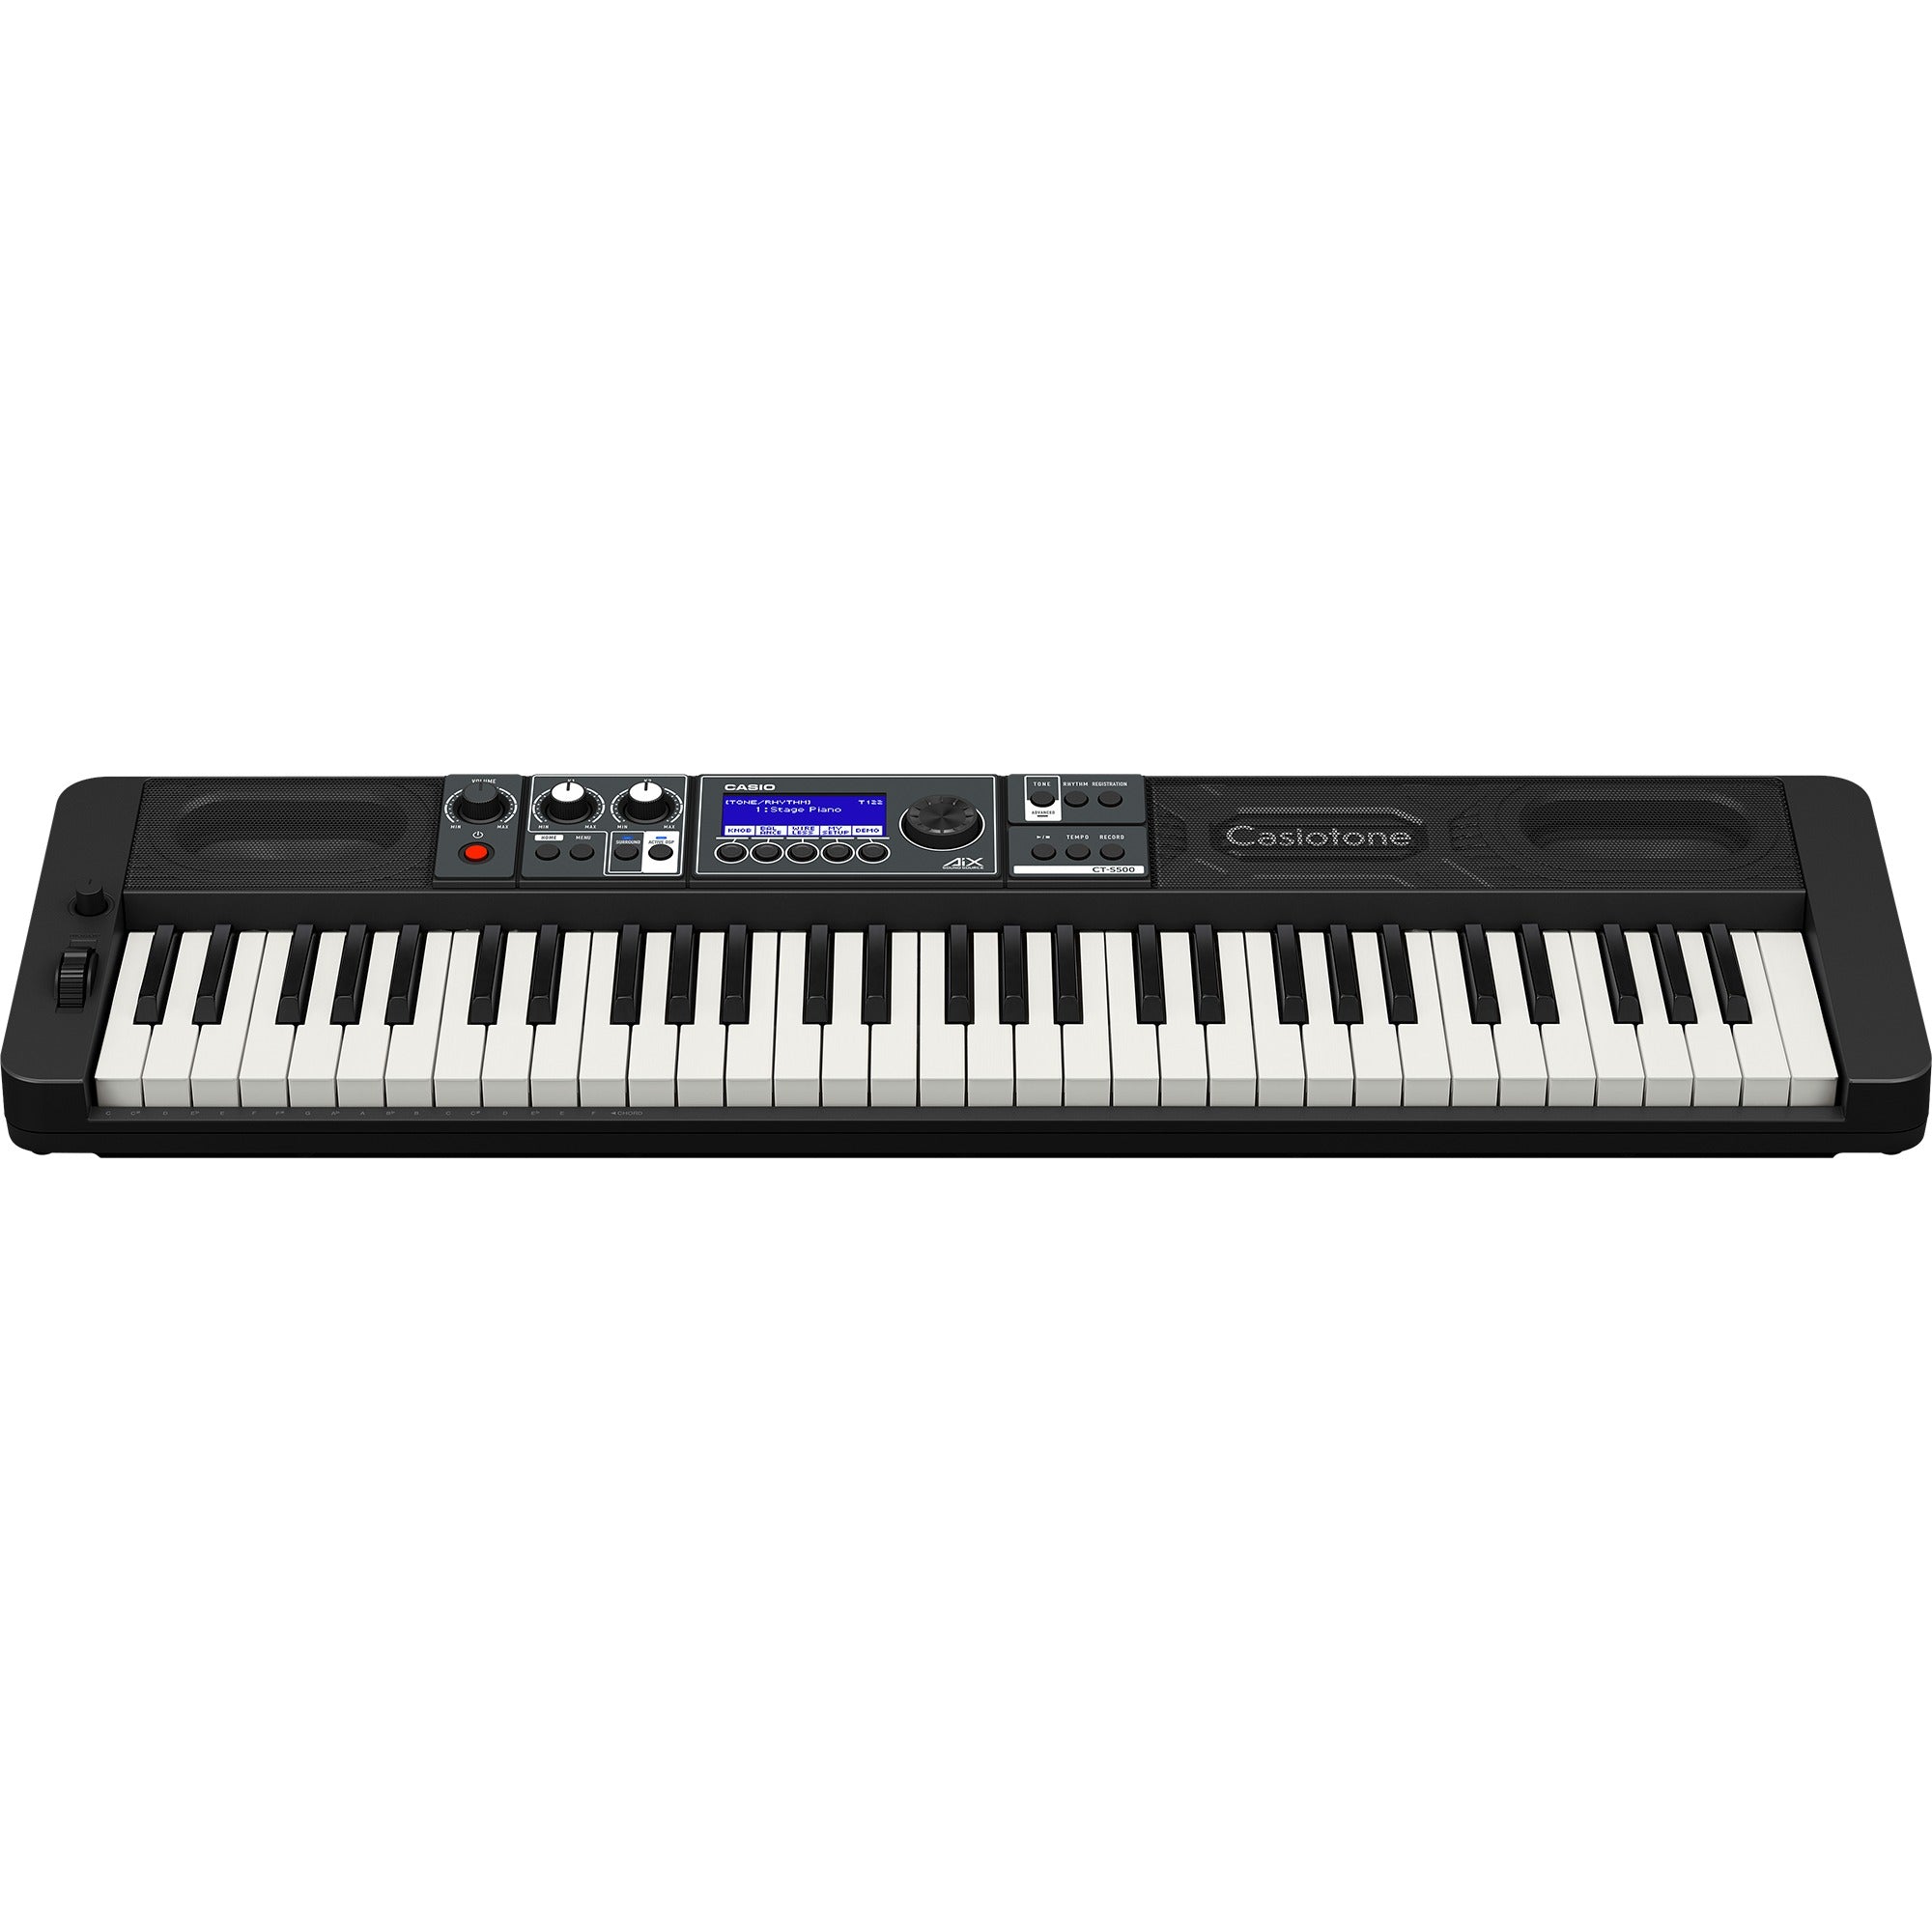 CASIO CTS500 61 Semi-Weighted Key Portable Keyboard